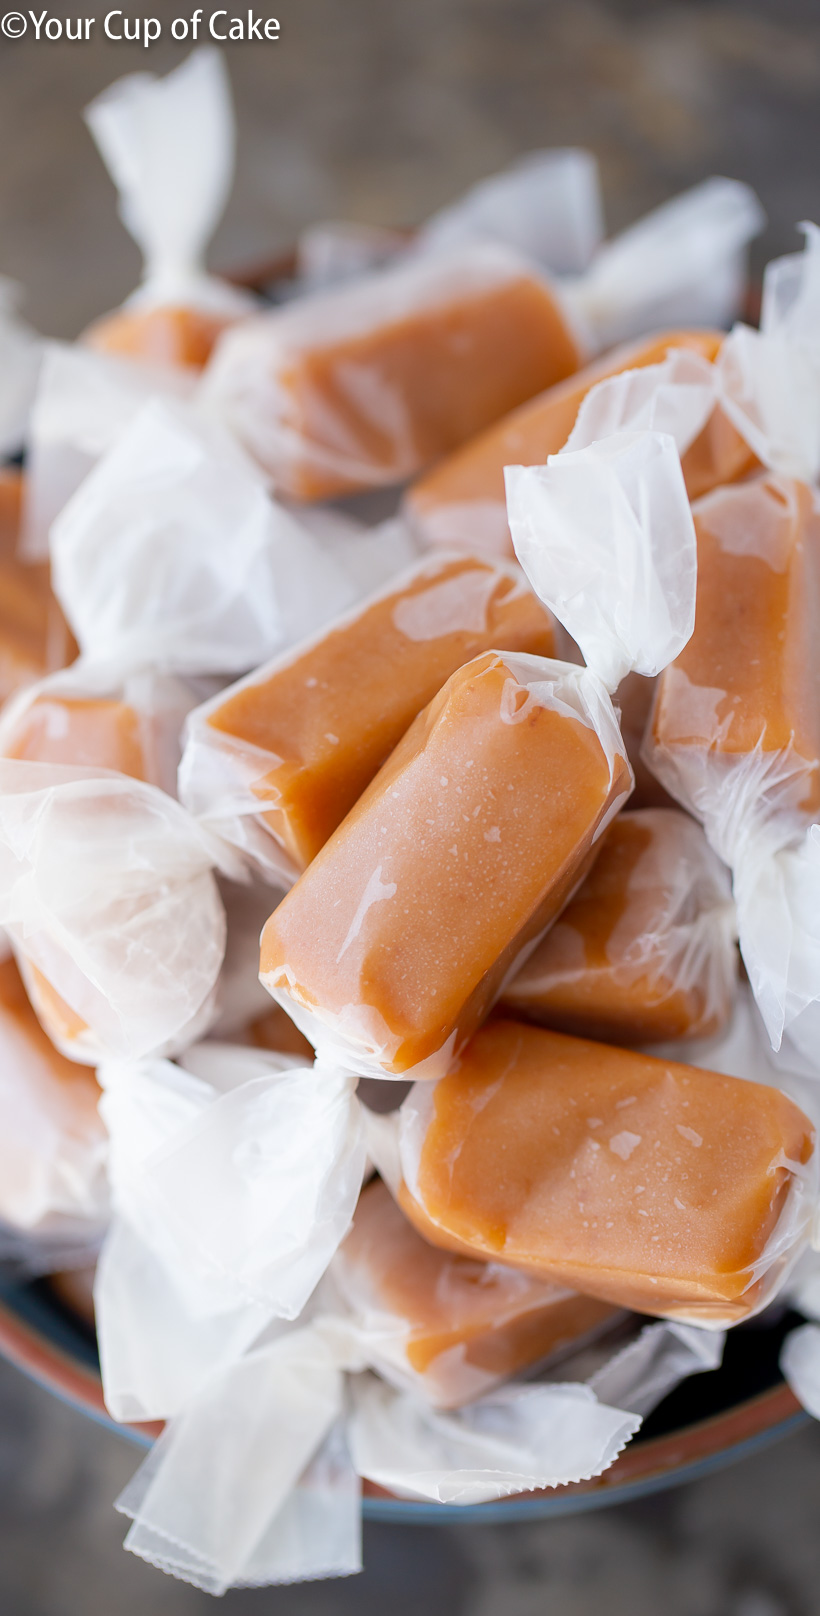 Five Tips to Make Scrumptious Caramel Candy